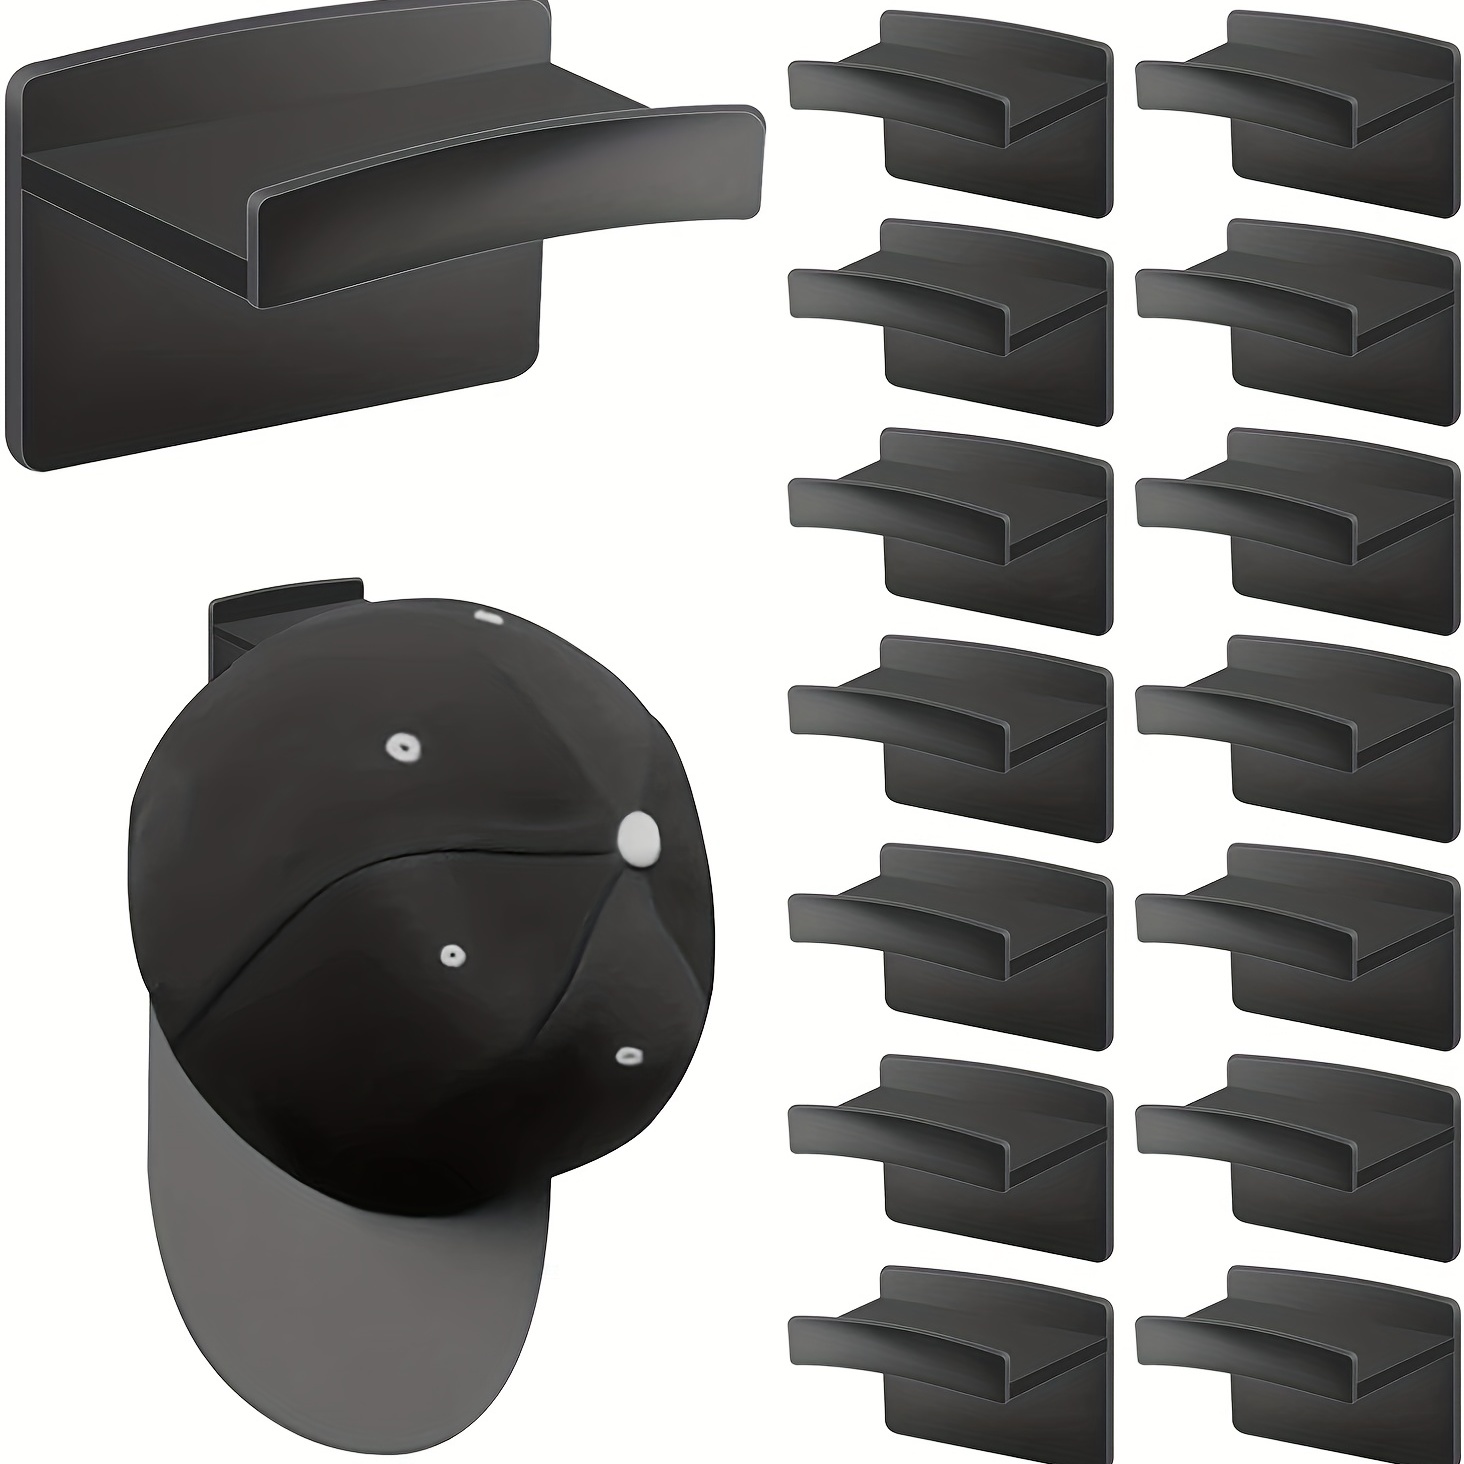 

10pcs No-drill Hat Rack - Organize Your Hats And Caps With Ease - Black